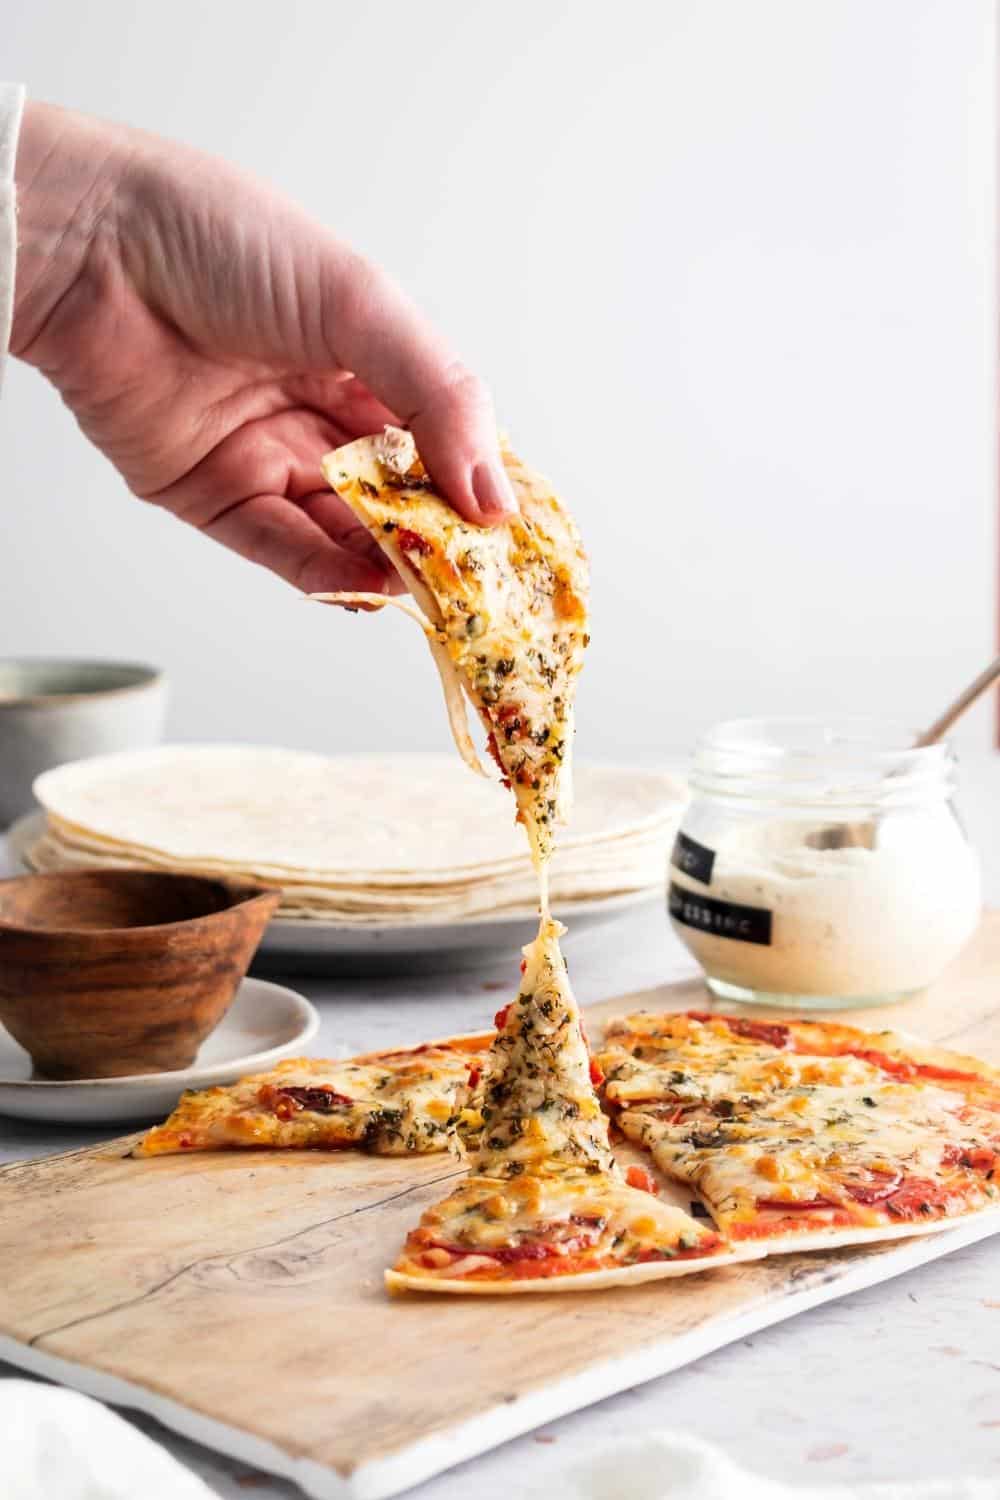 A hand holding a slice of tortilla pizza being pulled away from the whole pizza that is on a wooden cutting board.